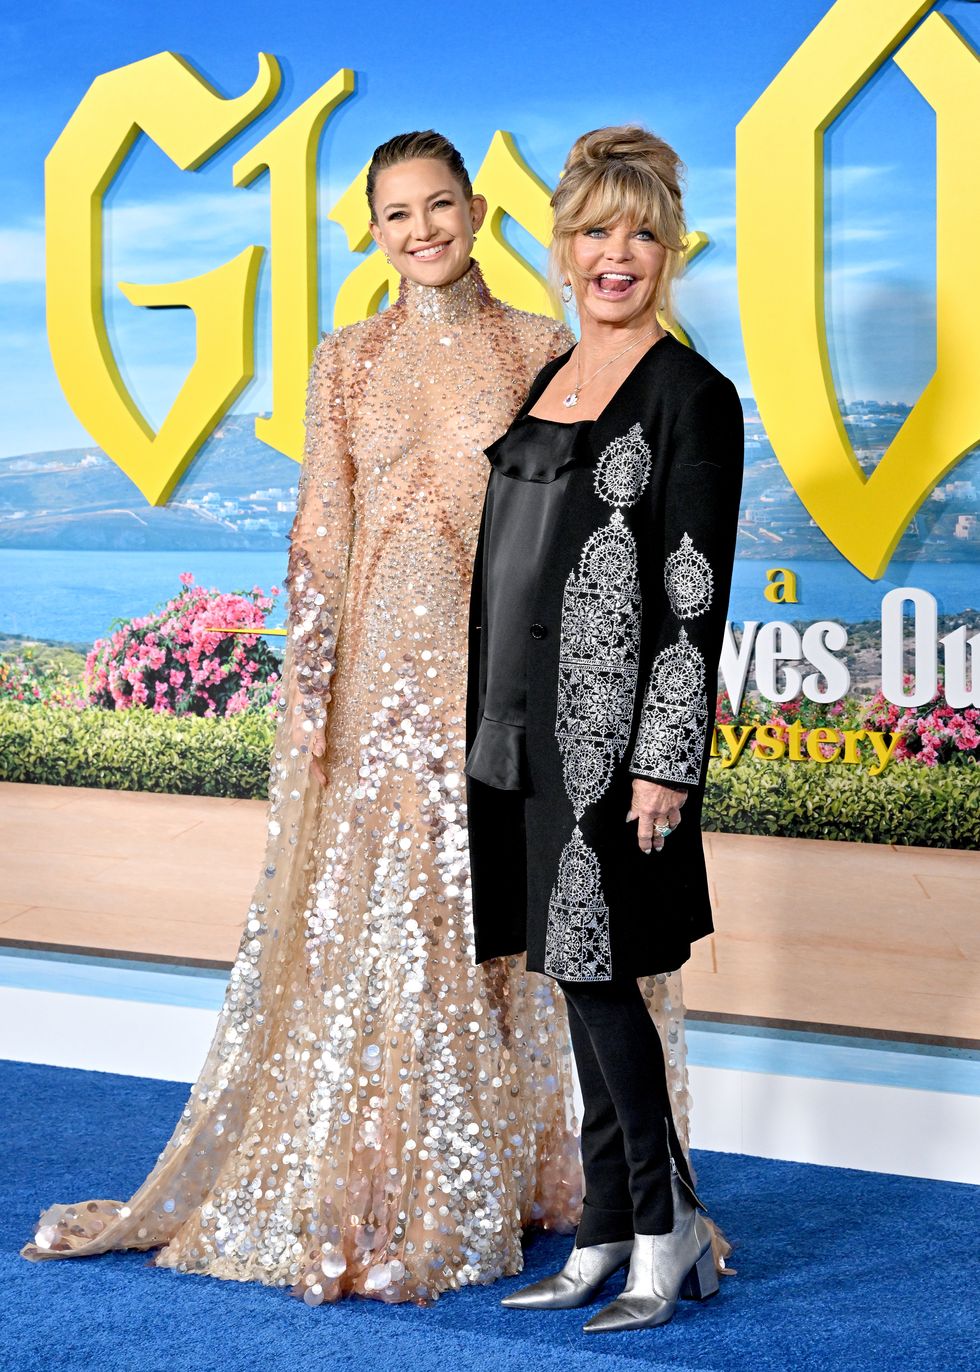 los angeles, california november 14 kate hudson and goldie hawn attend the premiere of glass onion a knives out mystery at academy museum of motion pictures on november 14, 2022 in los angeles, california photo by axellebauer griffinfilmmagic